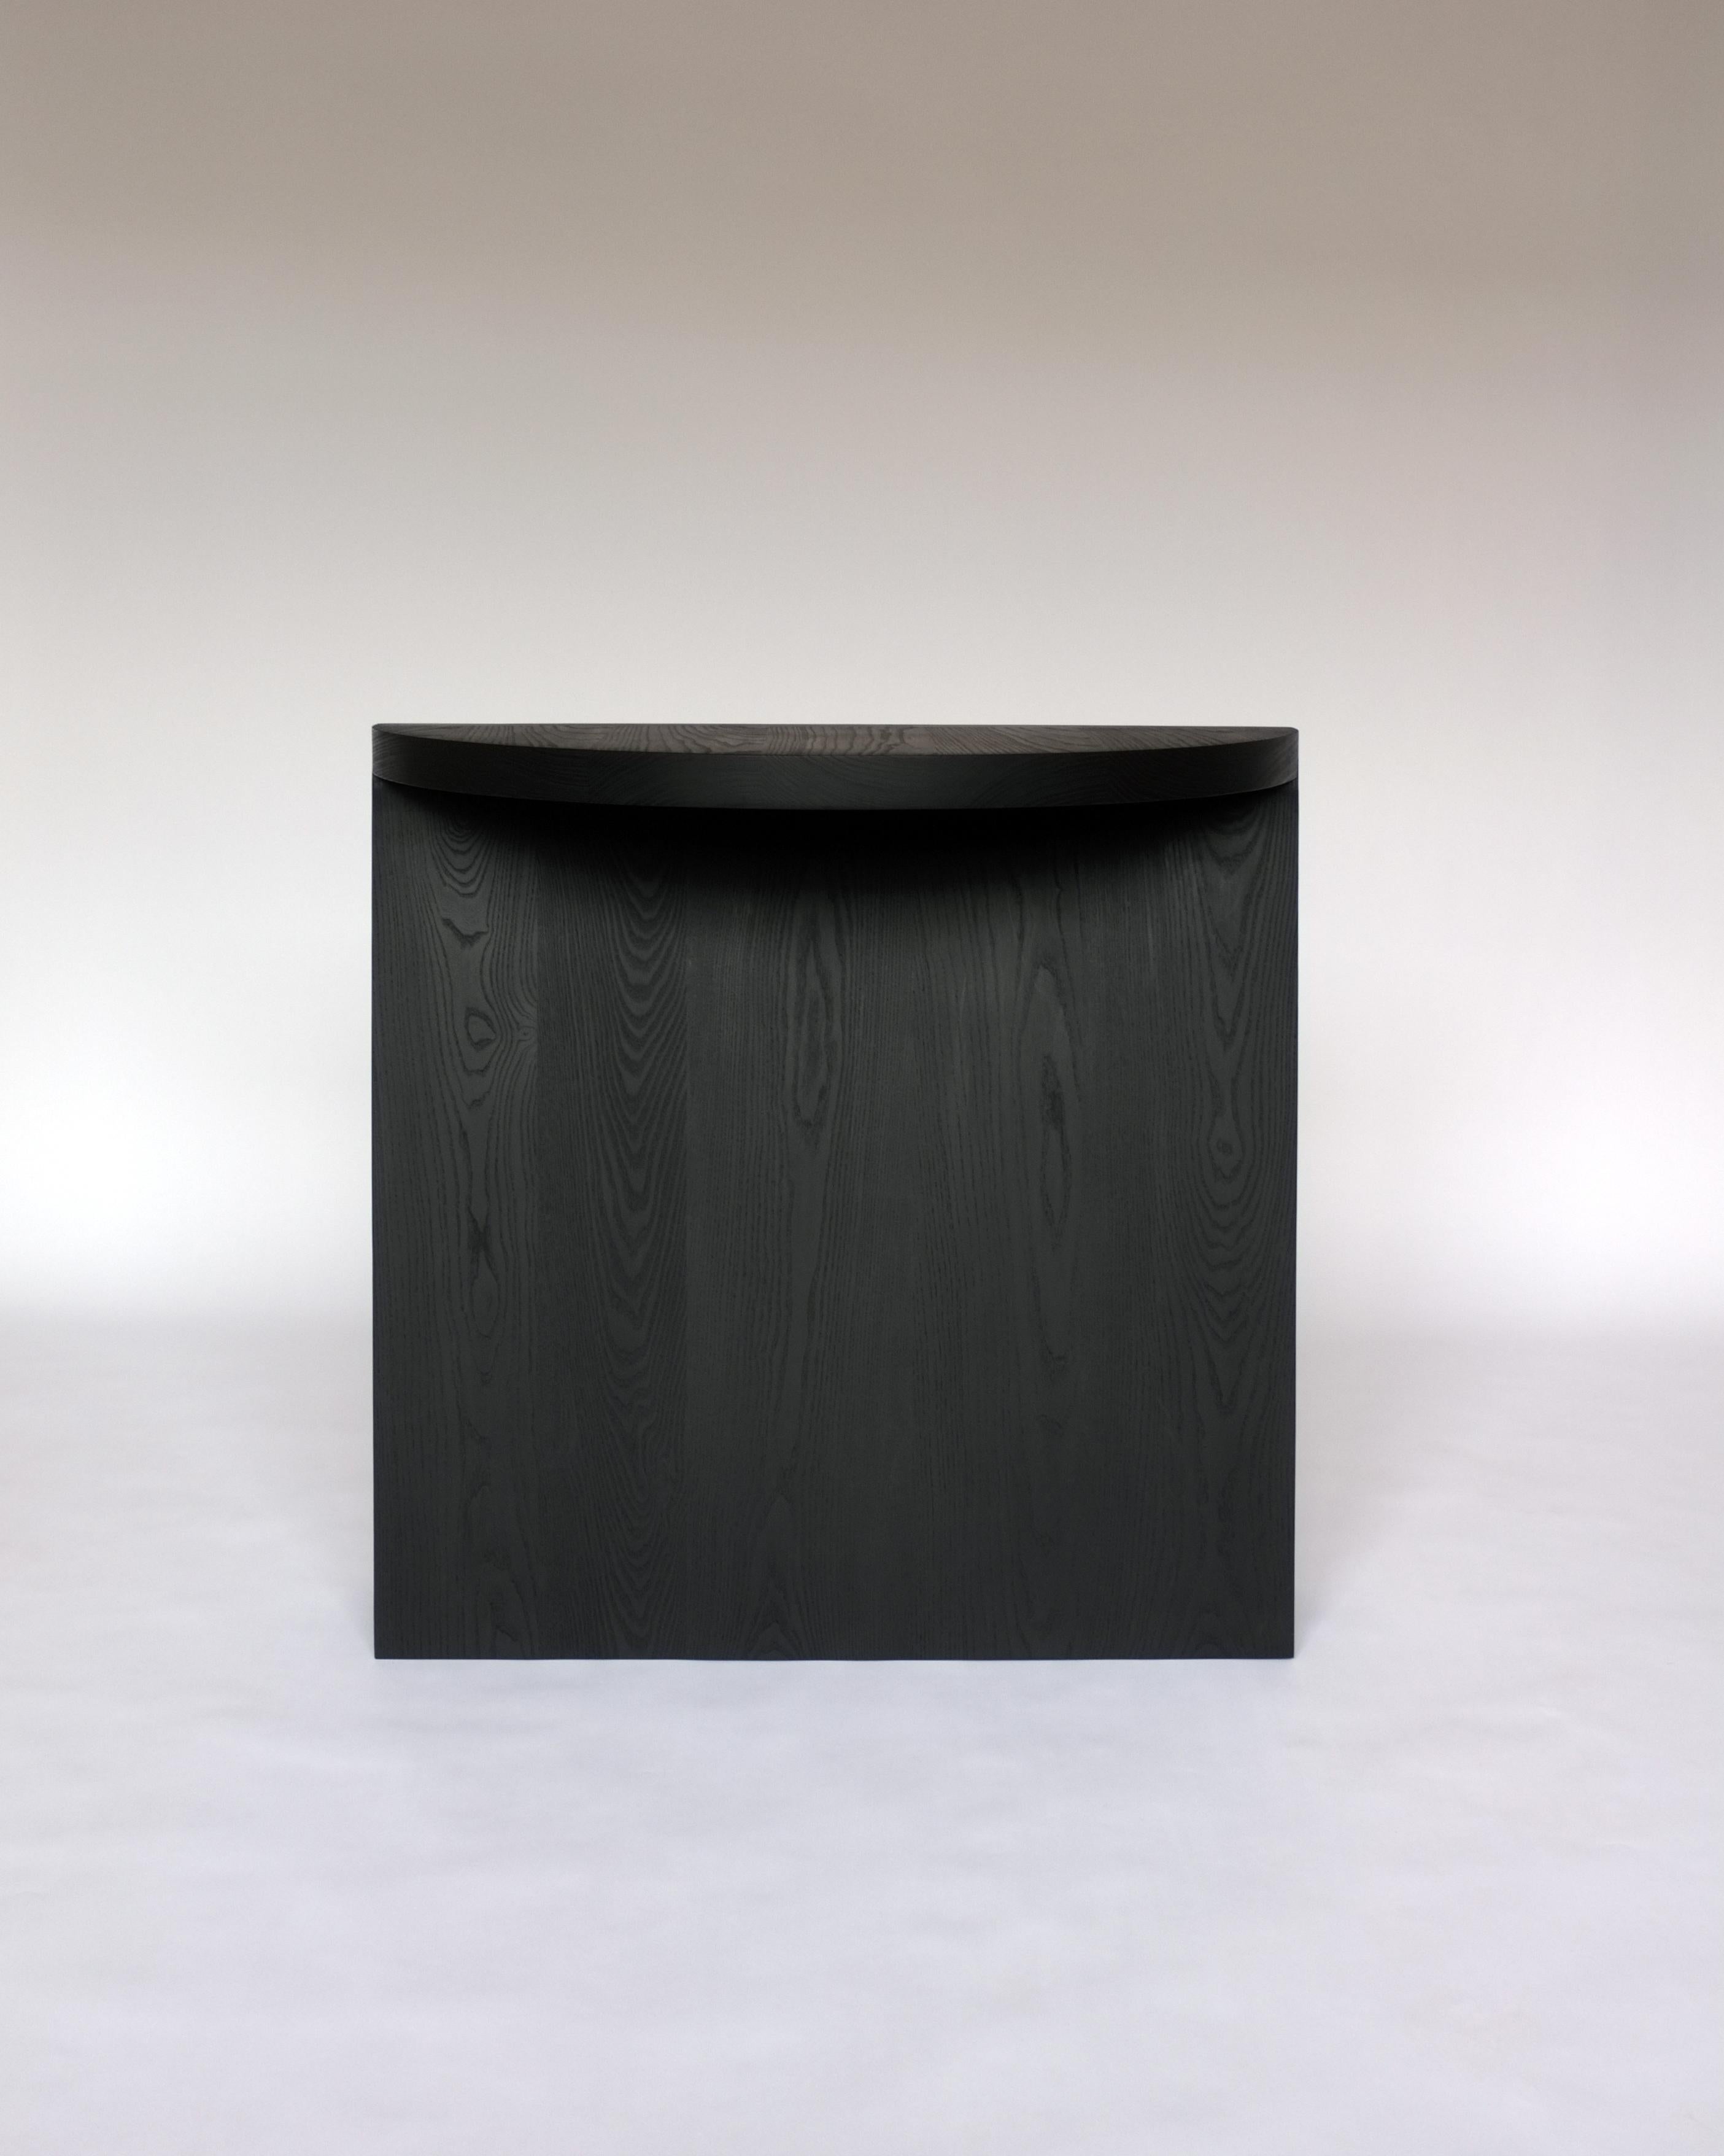 Wedge console table by Campagna in black dyed ash.

This sculptural, contemporary wooden console table features a simple half round top and a large pedestal base. The interaction of the two simple geometric forms creates moments of shifting